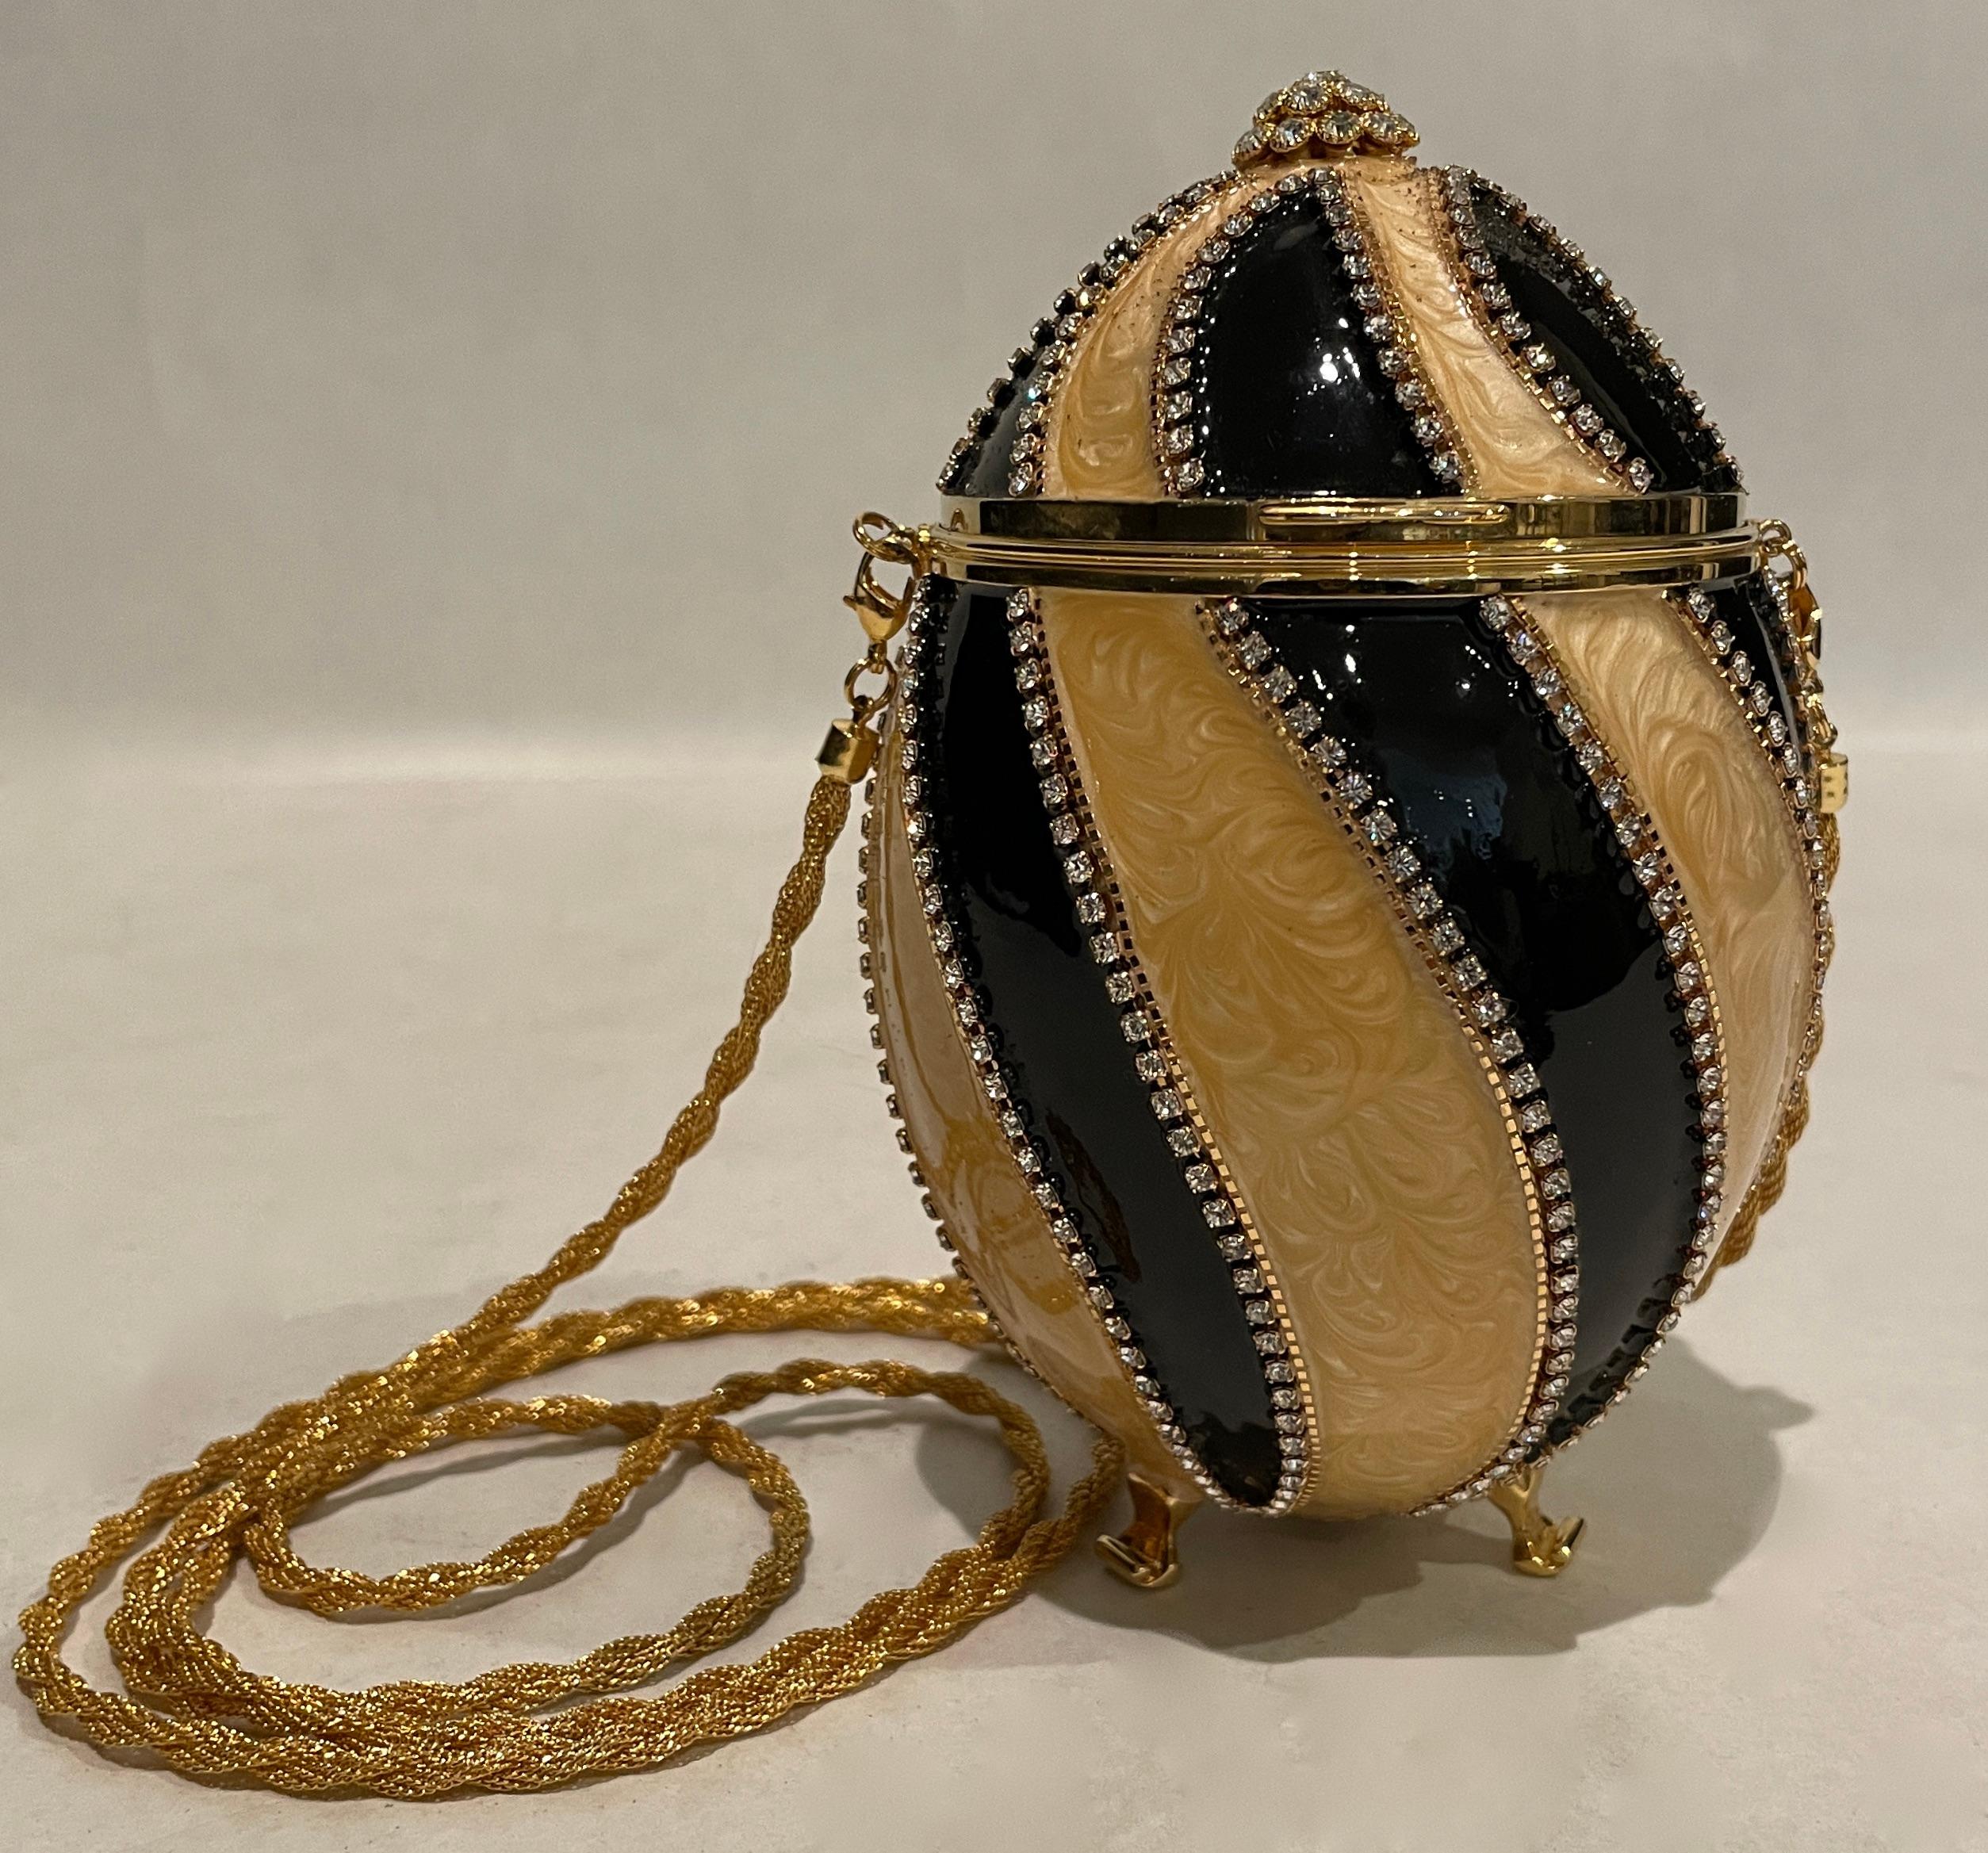 Cause a stir when carrying this exotic and luxurious Swarovski crystal with black and champagne enamel minaudiere! Vivian Alexander created the ostrich egg purse in 1990 and retired it in 2007. The enameled egg purse is made using techniques learned